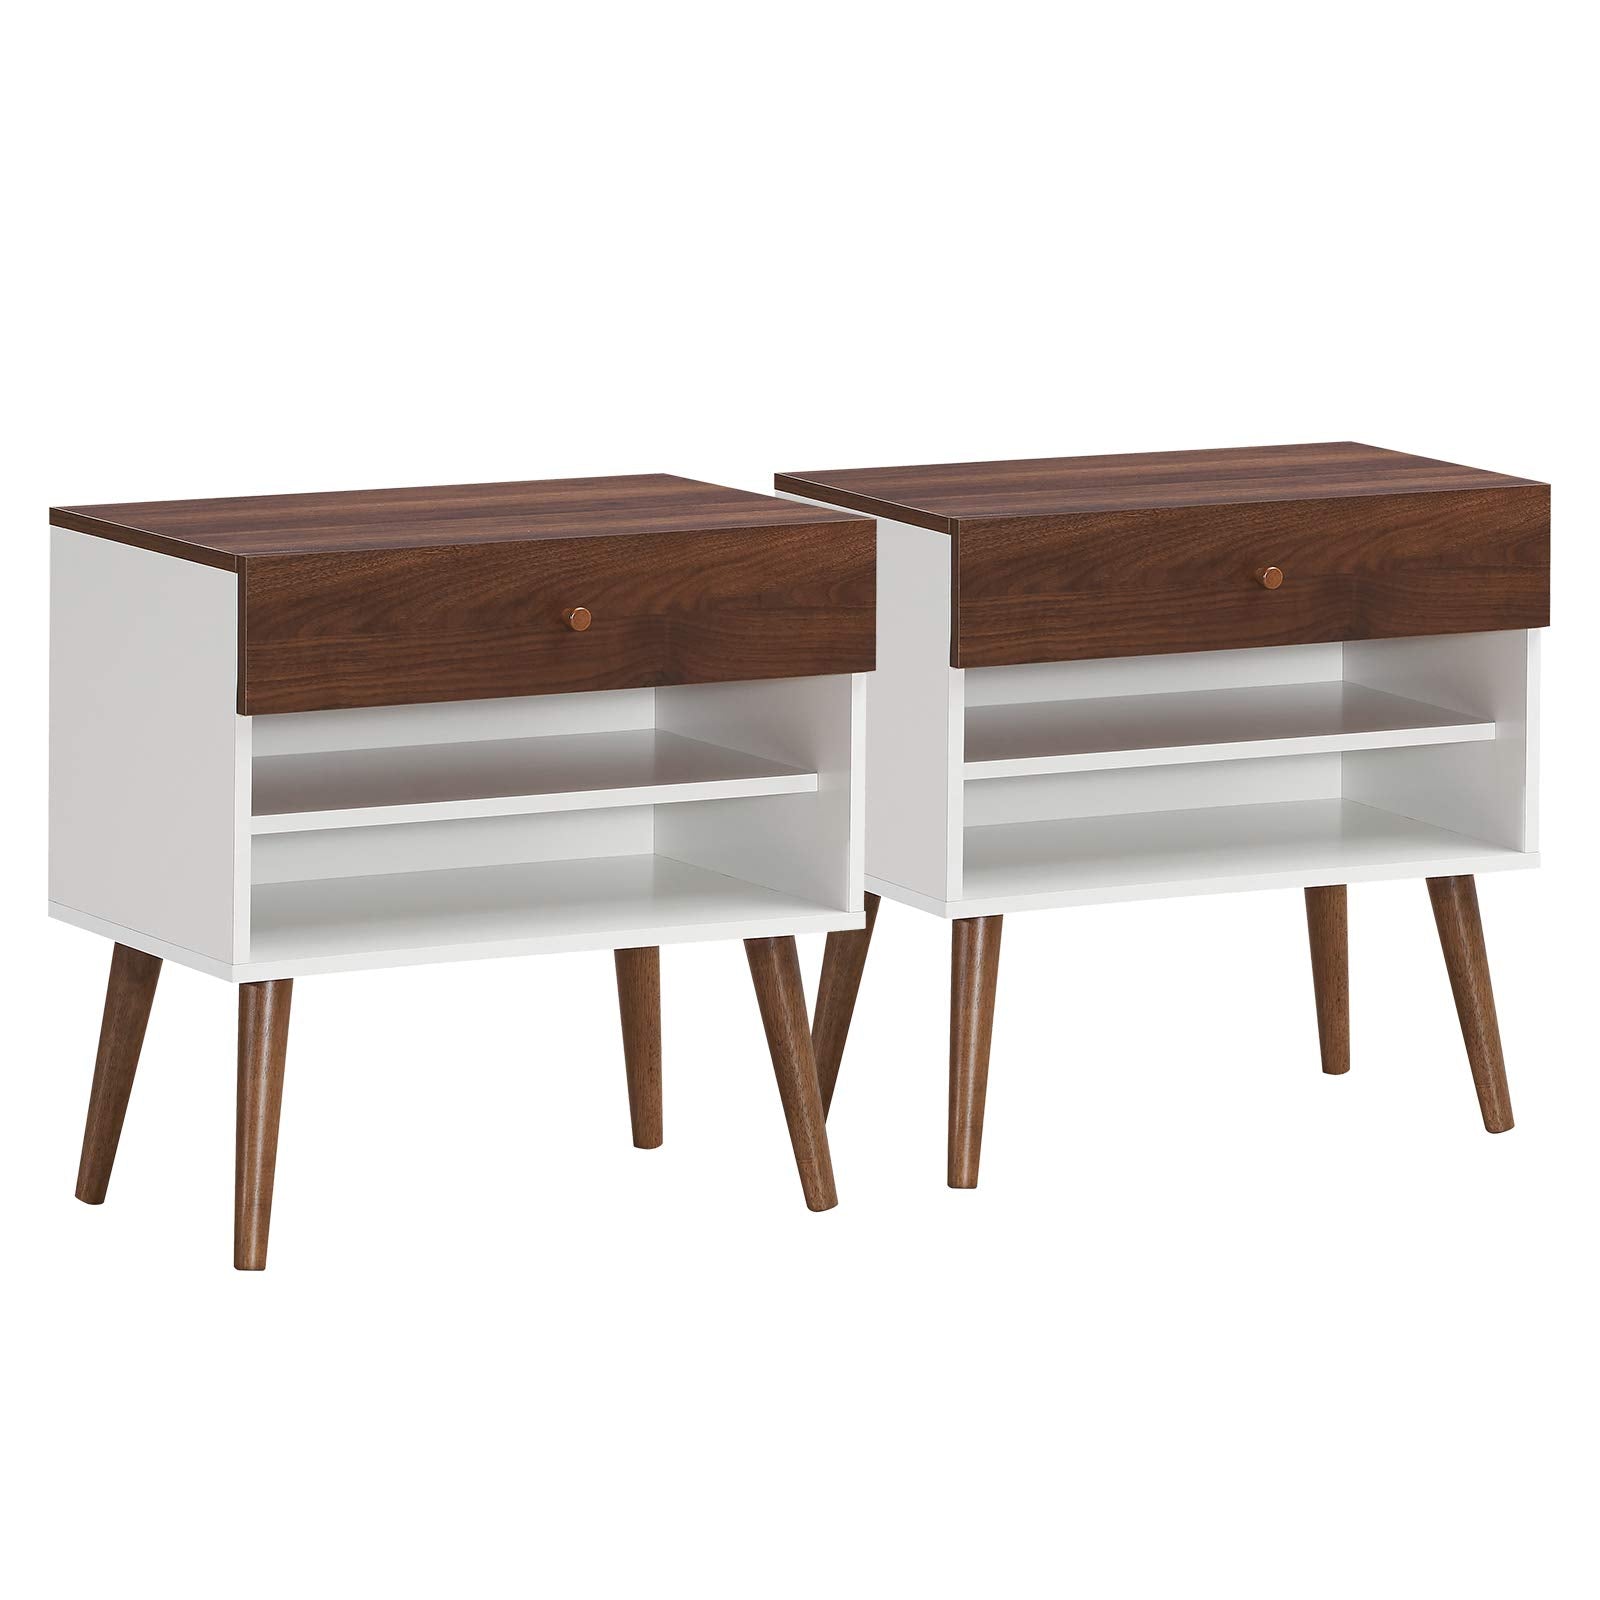 Nightstand with Drawer and Storage Shelves & Rubber Wood Legs, Brown&White